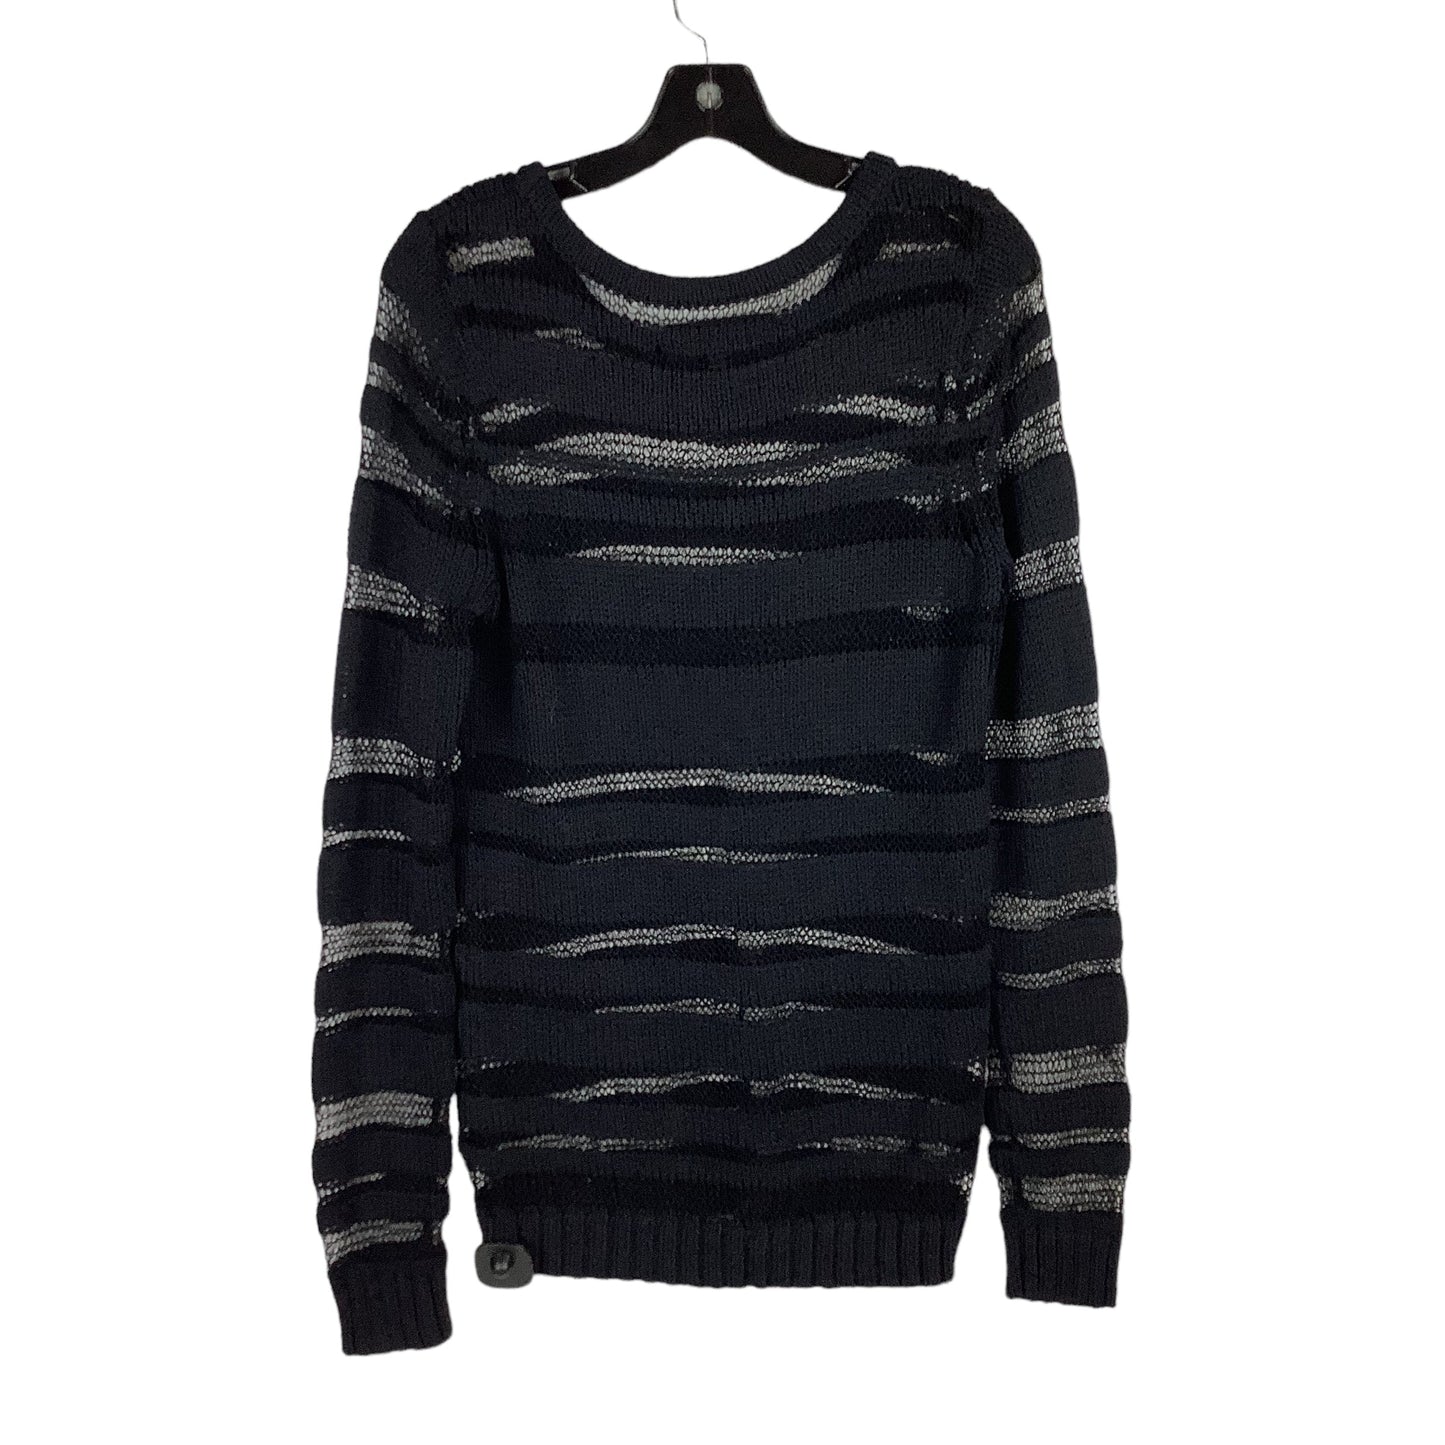 Sweater Designer By Rag And Bone  Size: M